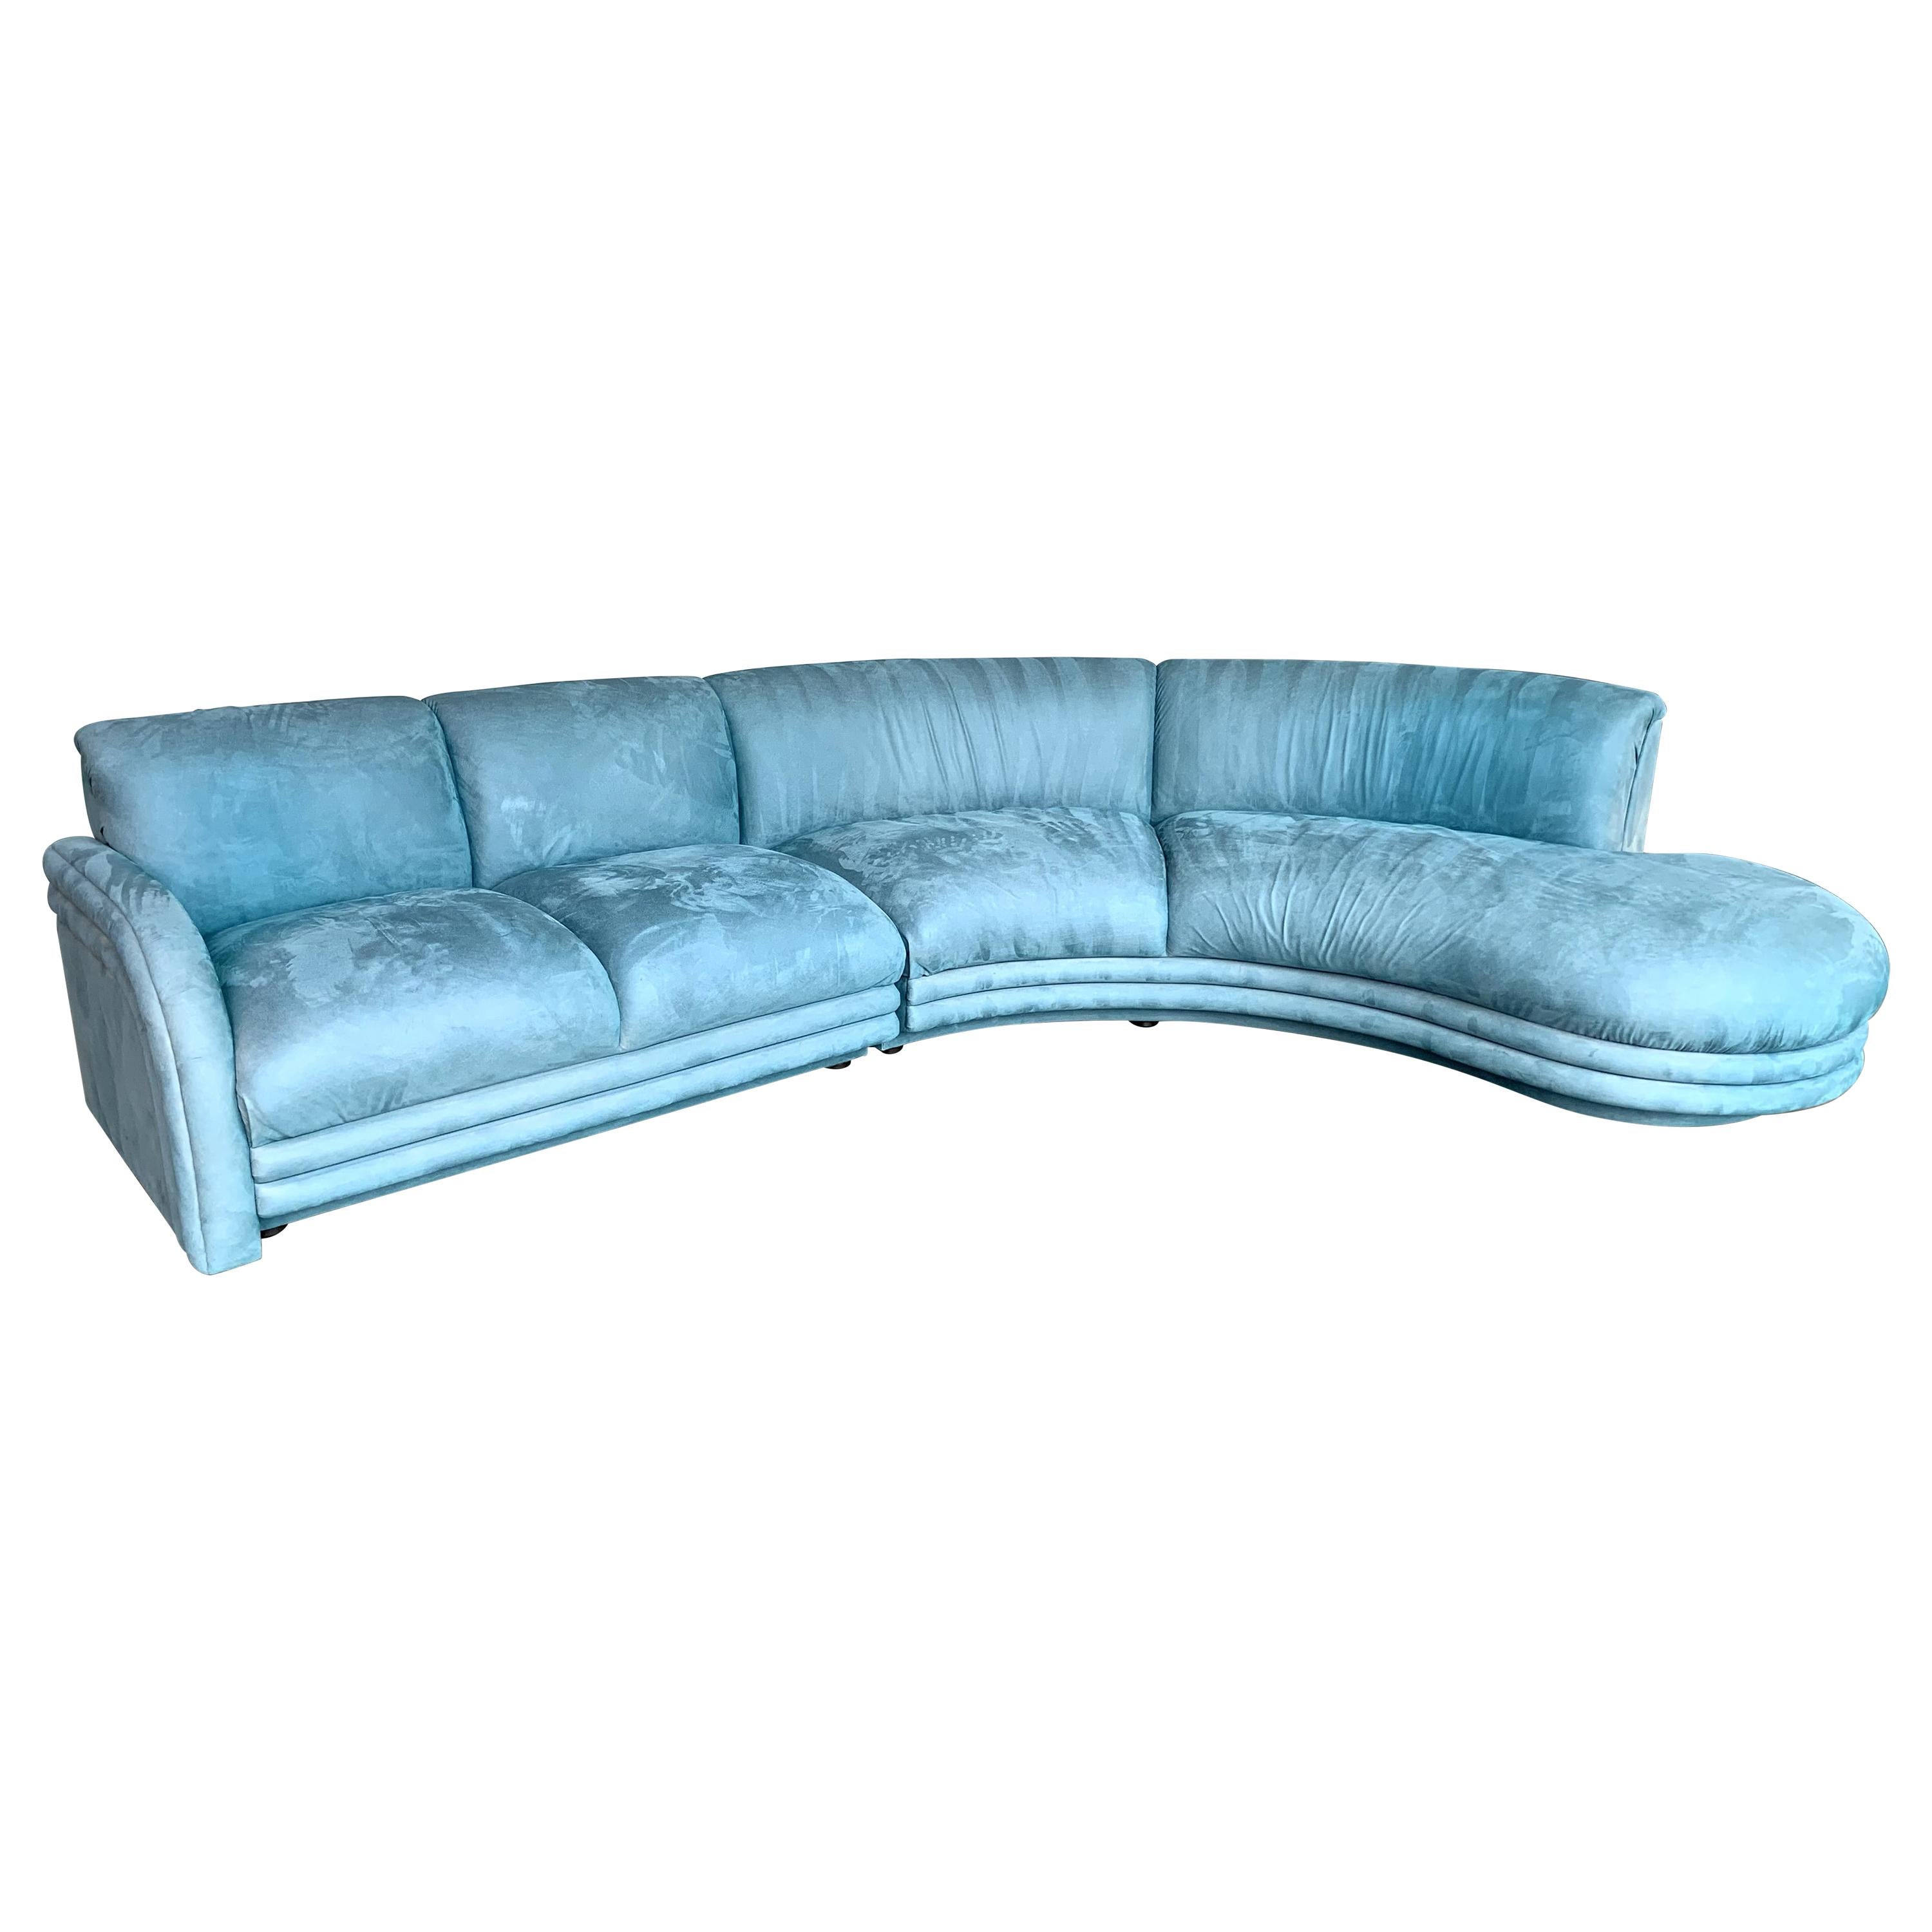 Mid-Century Modern Vladimir Kagan for Weiman Two Piece Sectional